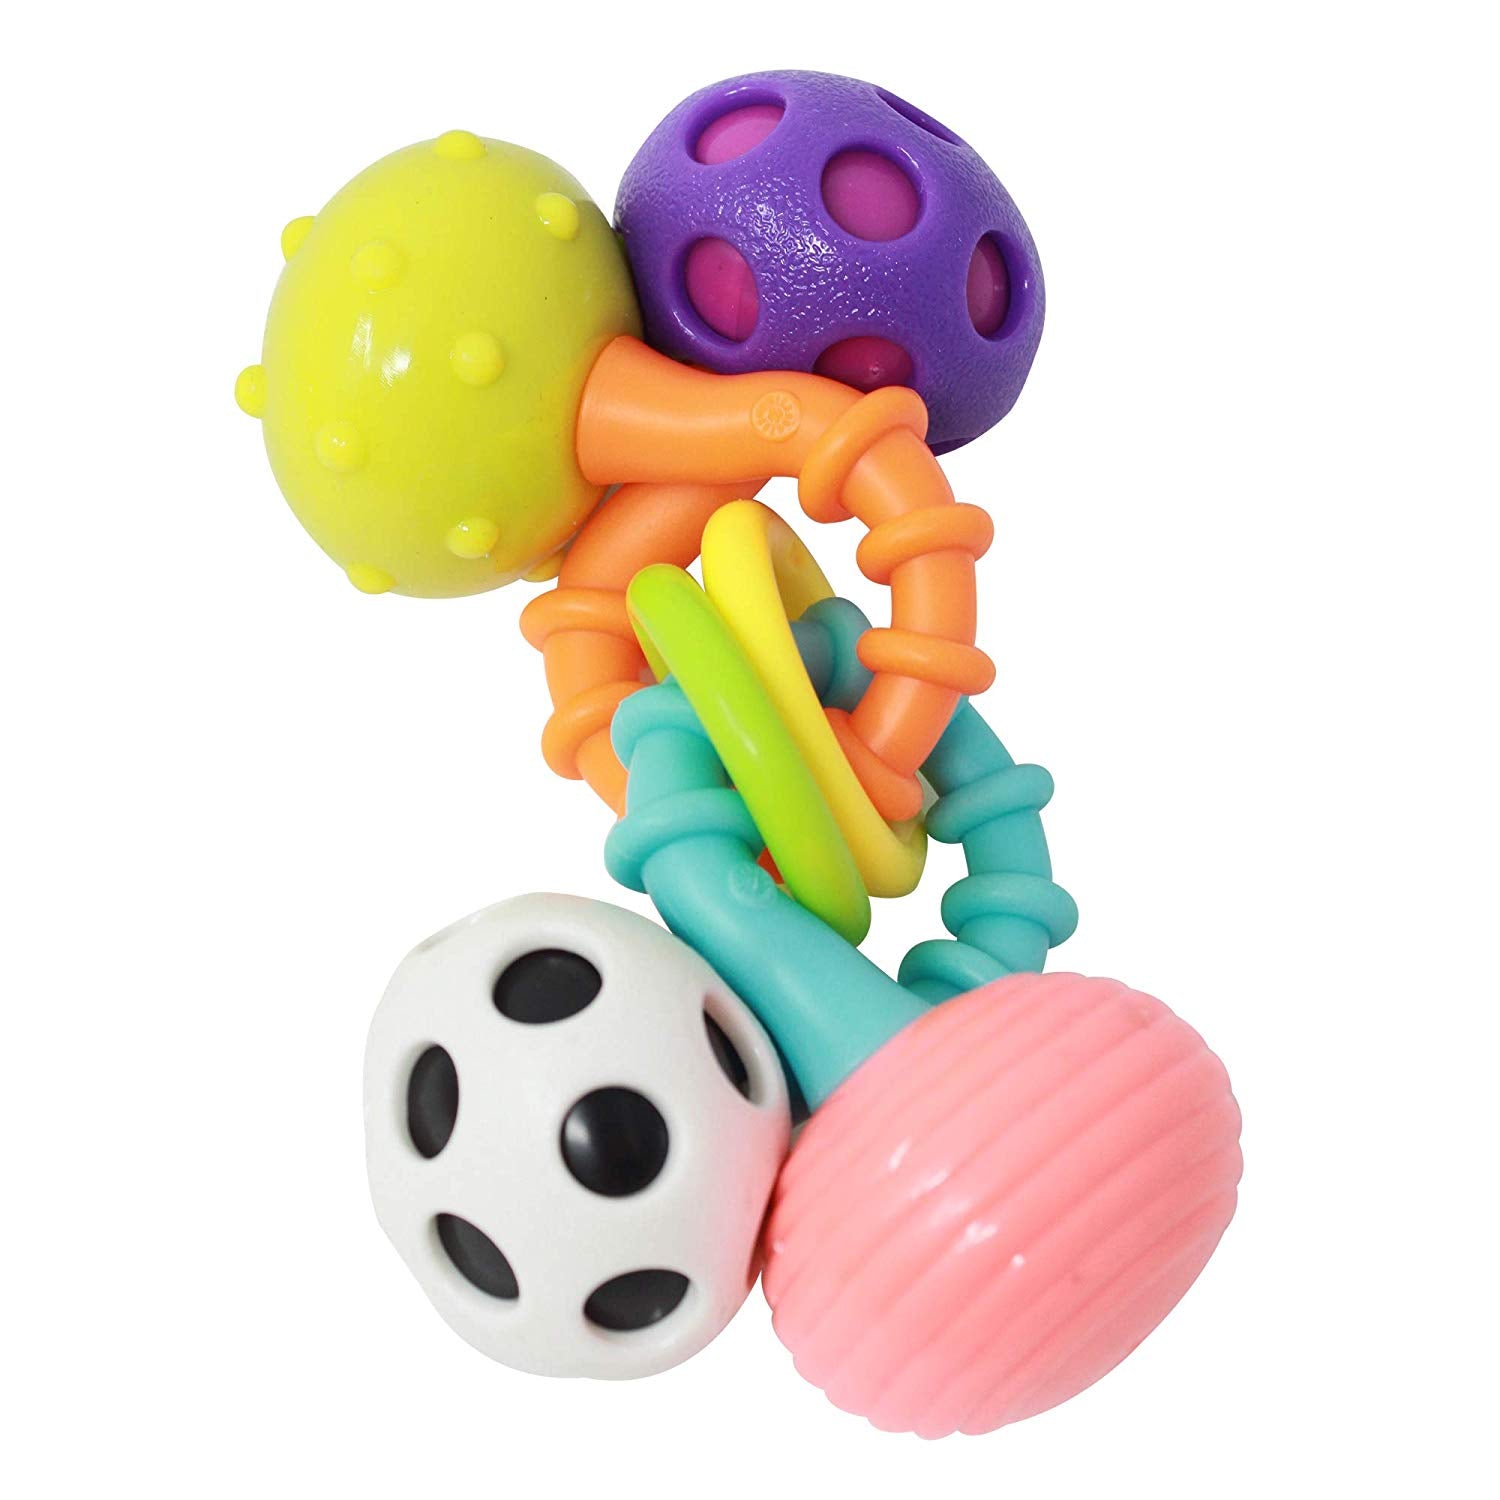 Generic 7pcs Fun & Colourful Baby Rattles Toys